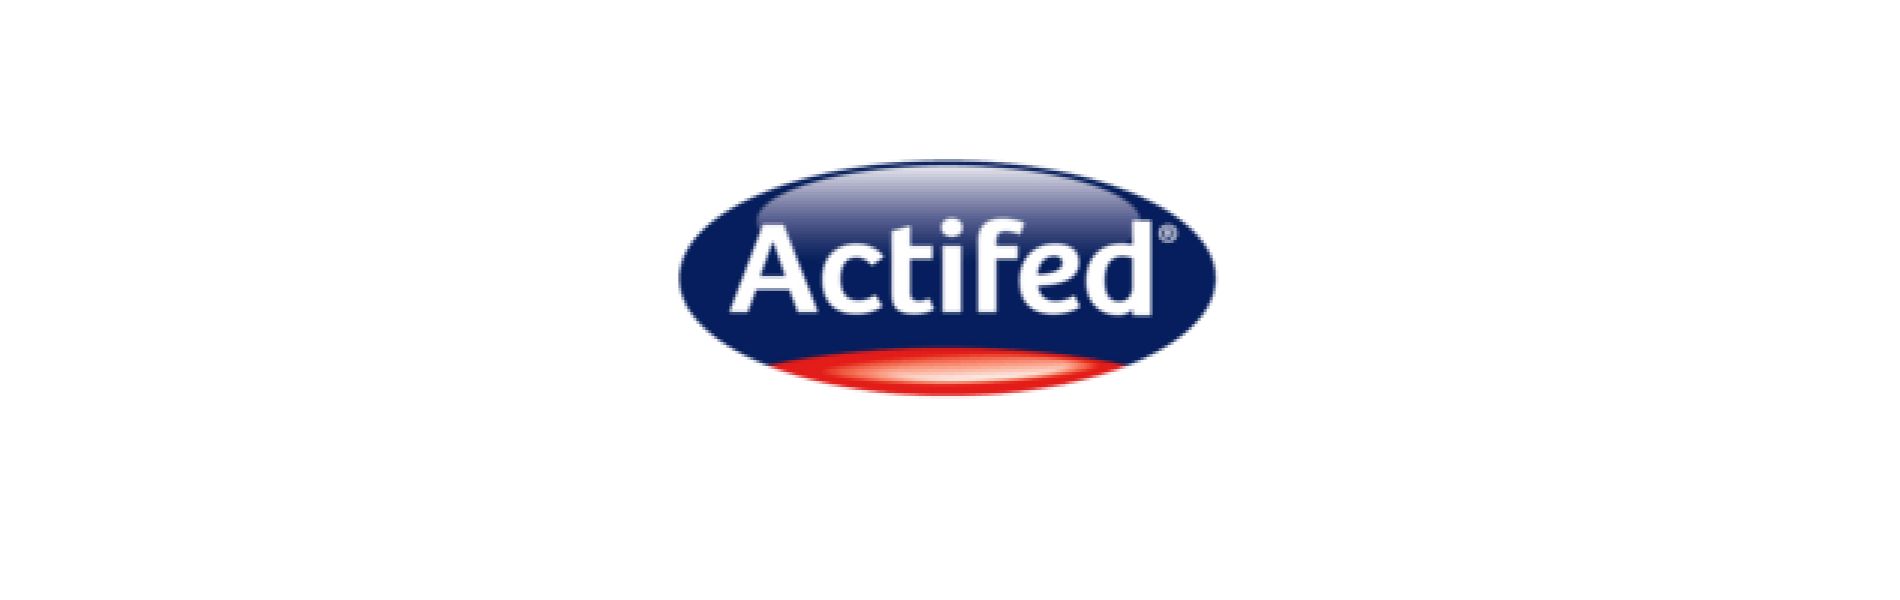 ACTIFED